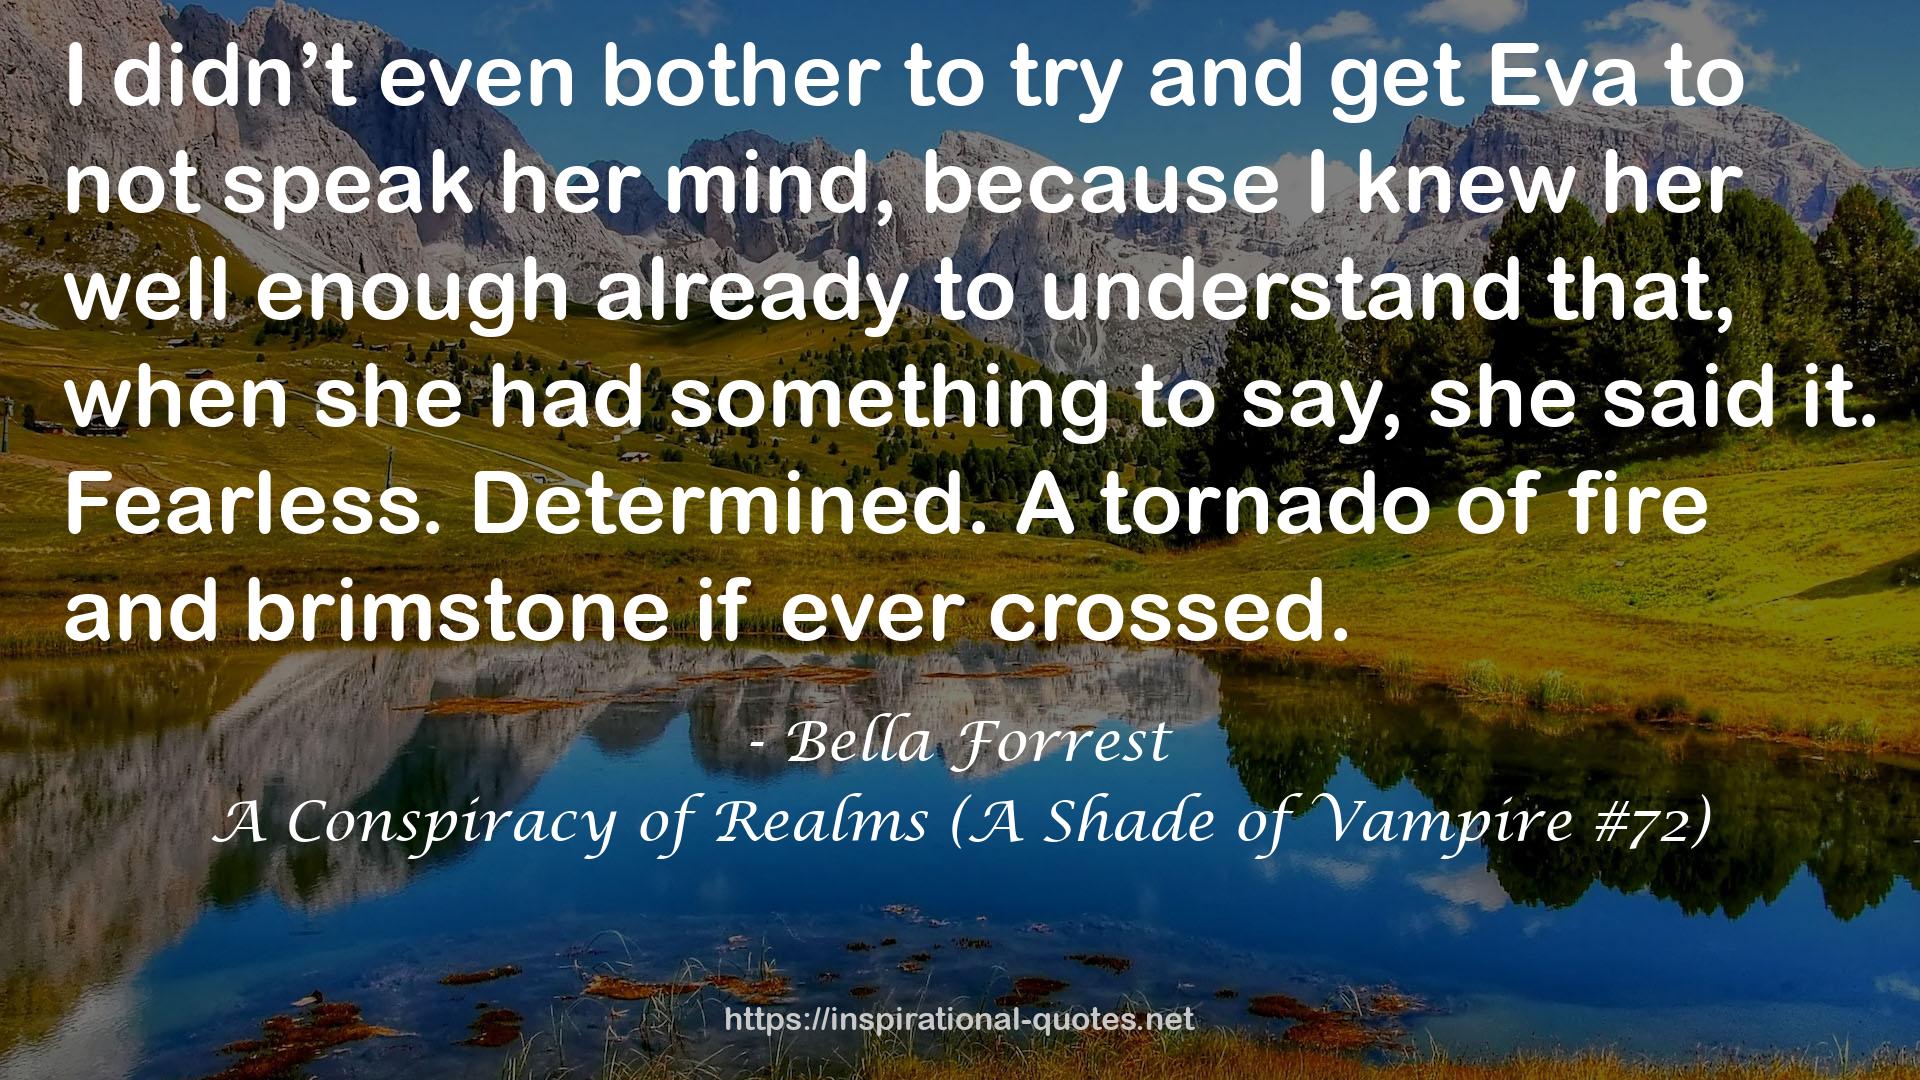 A Conspiracy of Realms (A Shade of Vampire #72) QUOTES